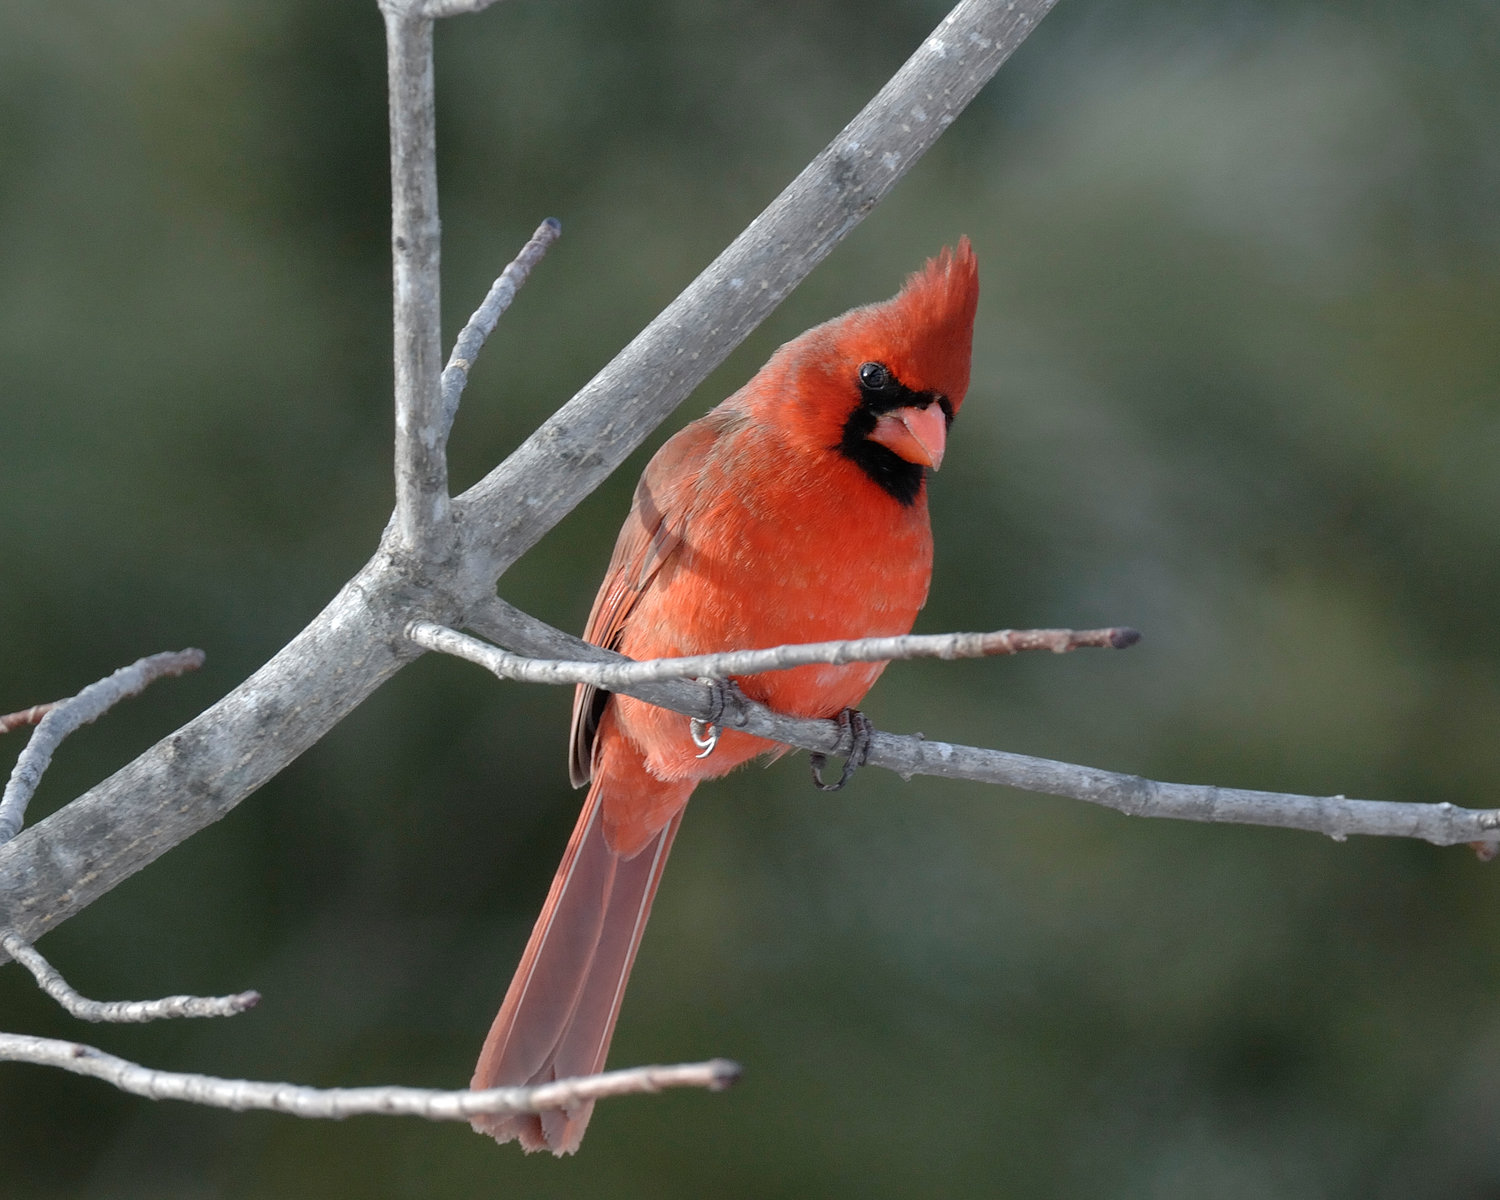 The northern cardinal is one of the easiest bird species to spot during winter, with the bright red plumage of the male and the slightly toned-down plumage, with red highlights, of the female. Many people associate cardinals with Christmas, as the red plumage projects faith and warmth. Cardinals can be seen year-round in the region; however, the bare trees and snow-covered landscape of winter makes them much more obvious.